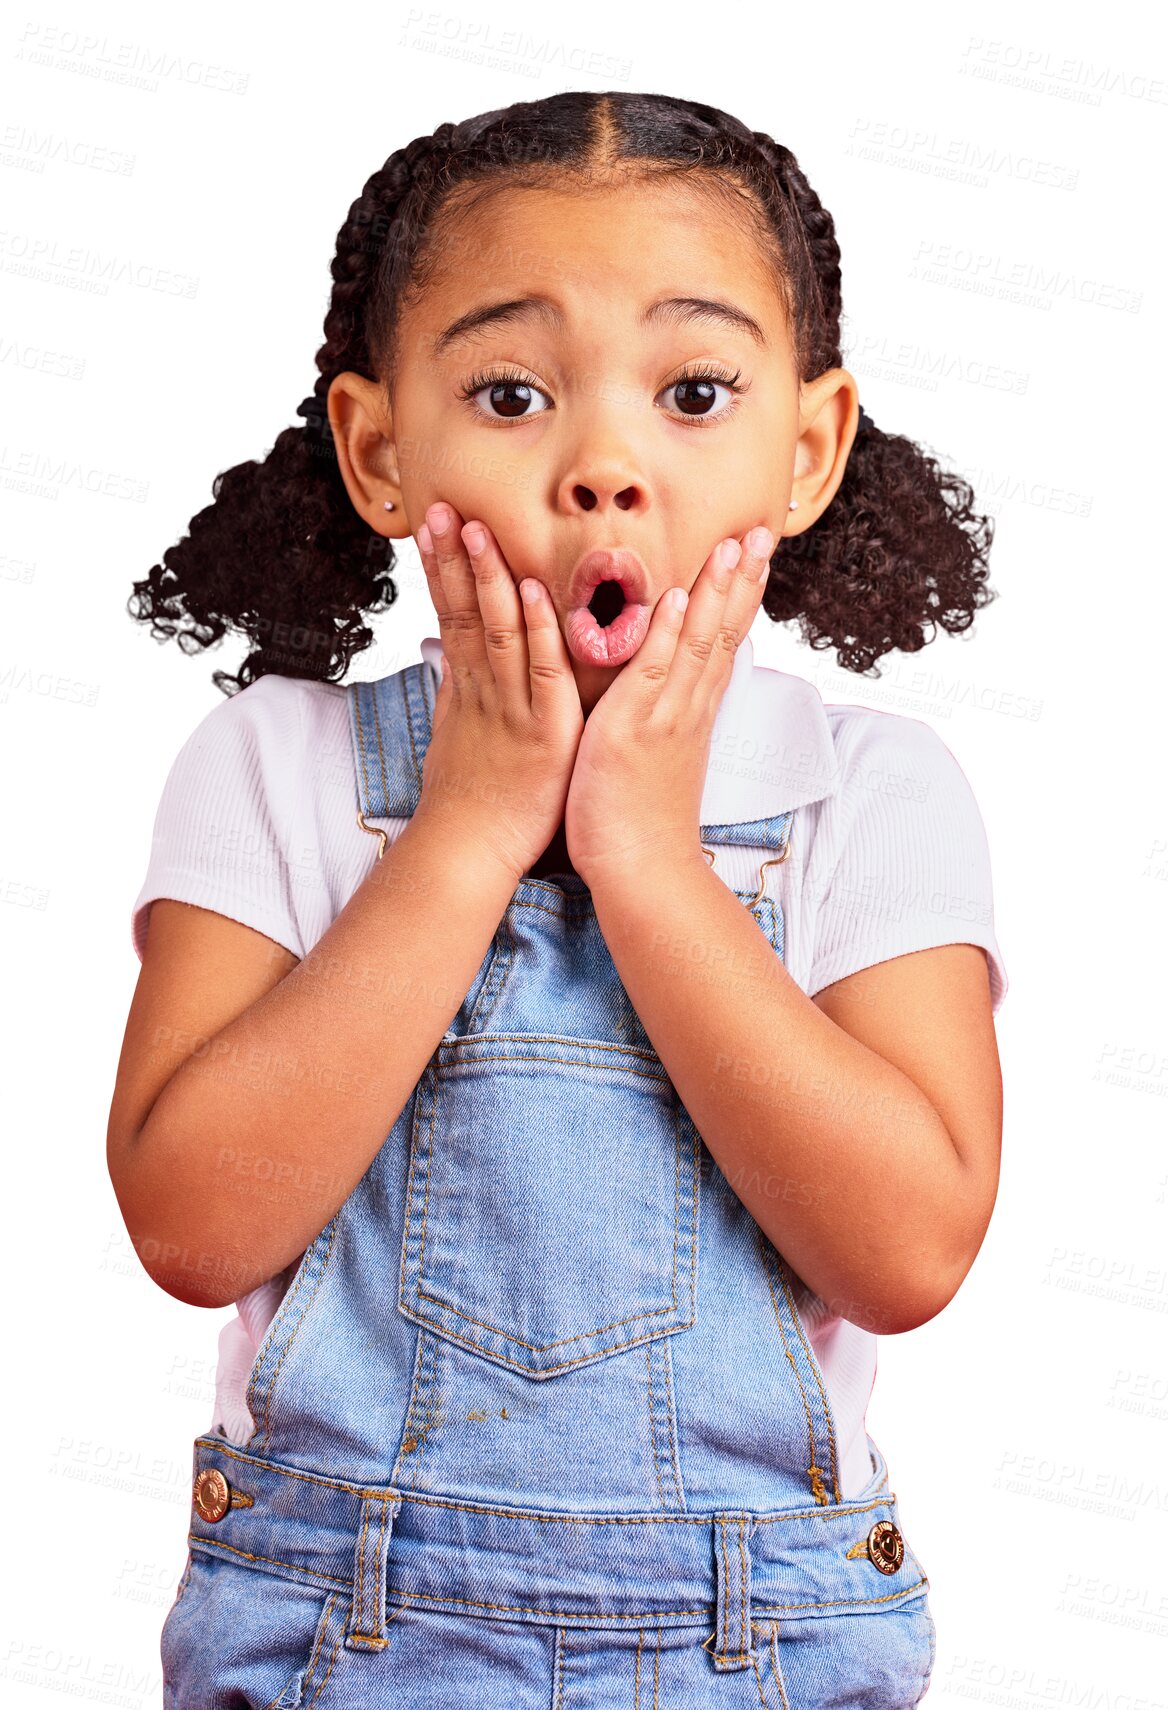 Buy stock photo Surprise, portrait or girl with news, wow or announcement isolated on a transparent background. Omg, female child or happy kid with facial expression, cute or png with emoji, shocked and notification